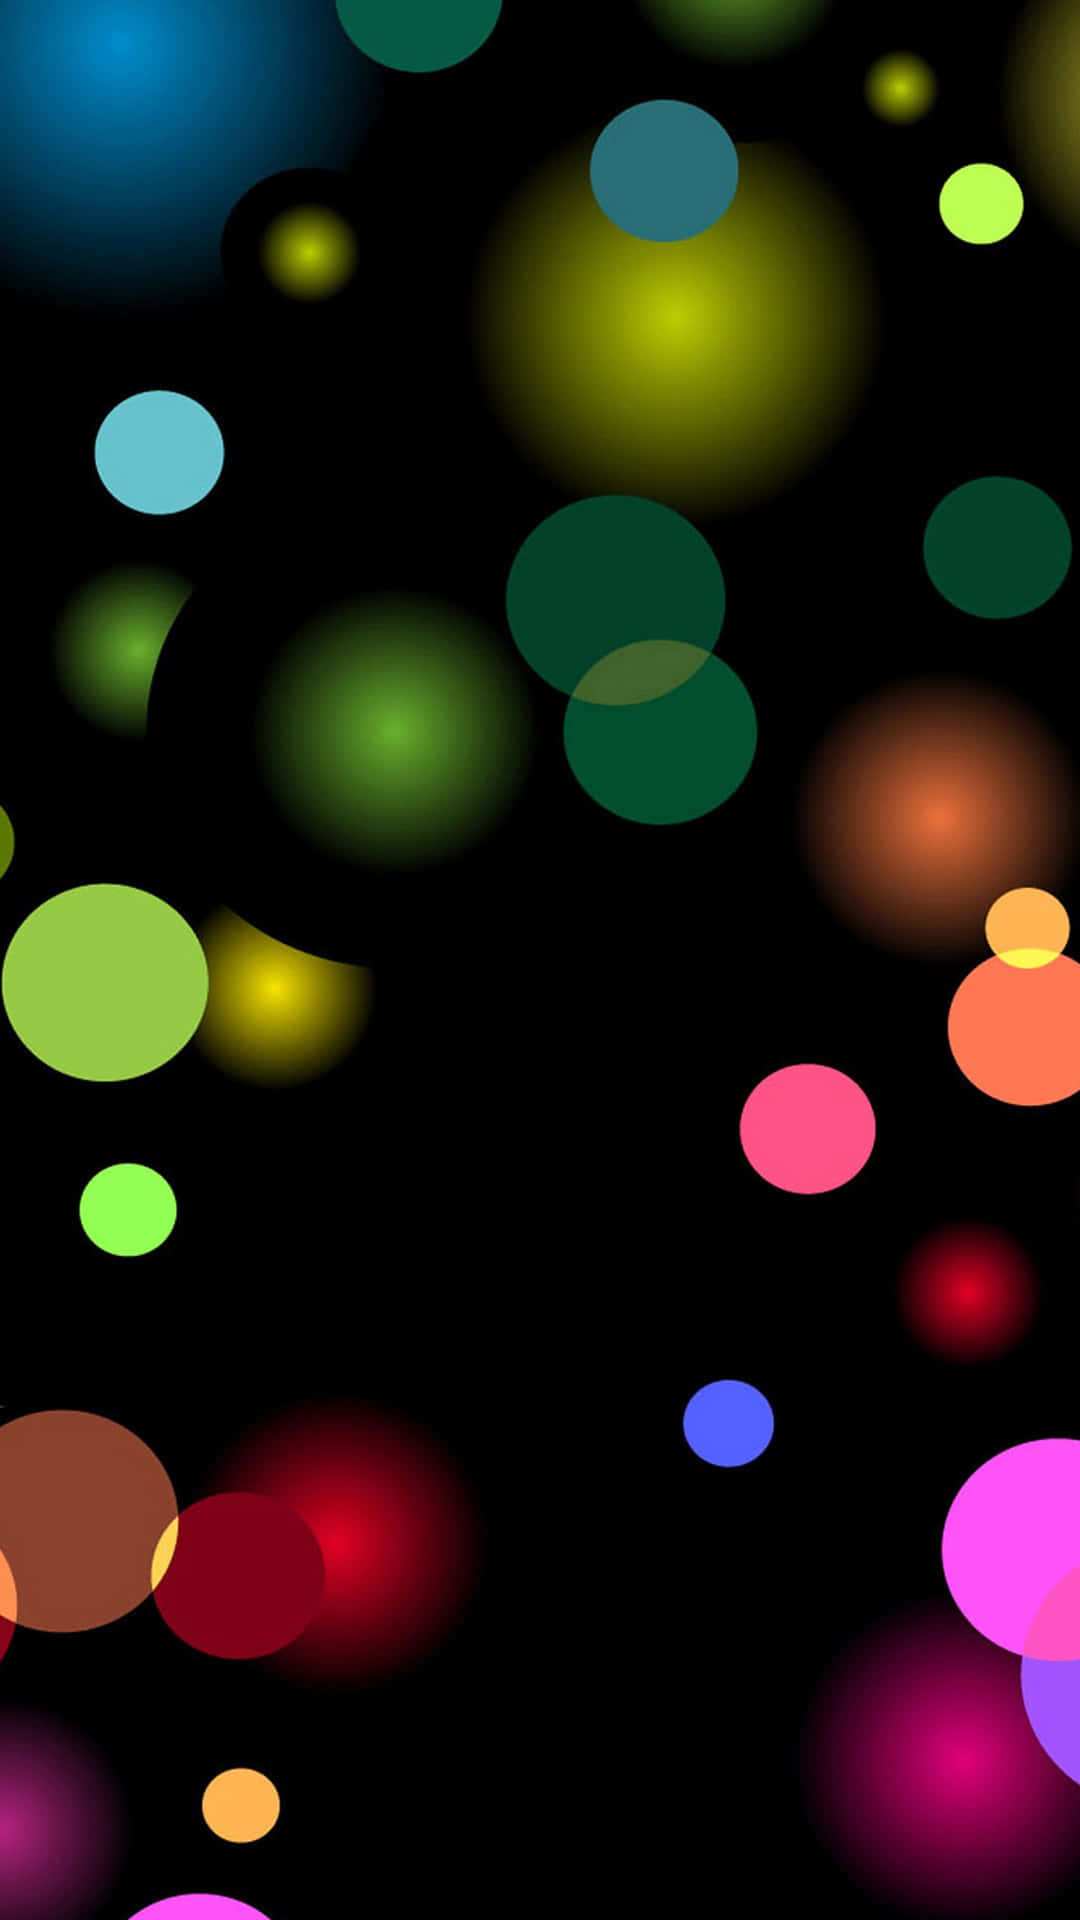 A Black Background With Many Colorful Circles